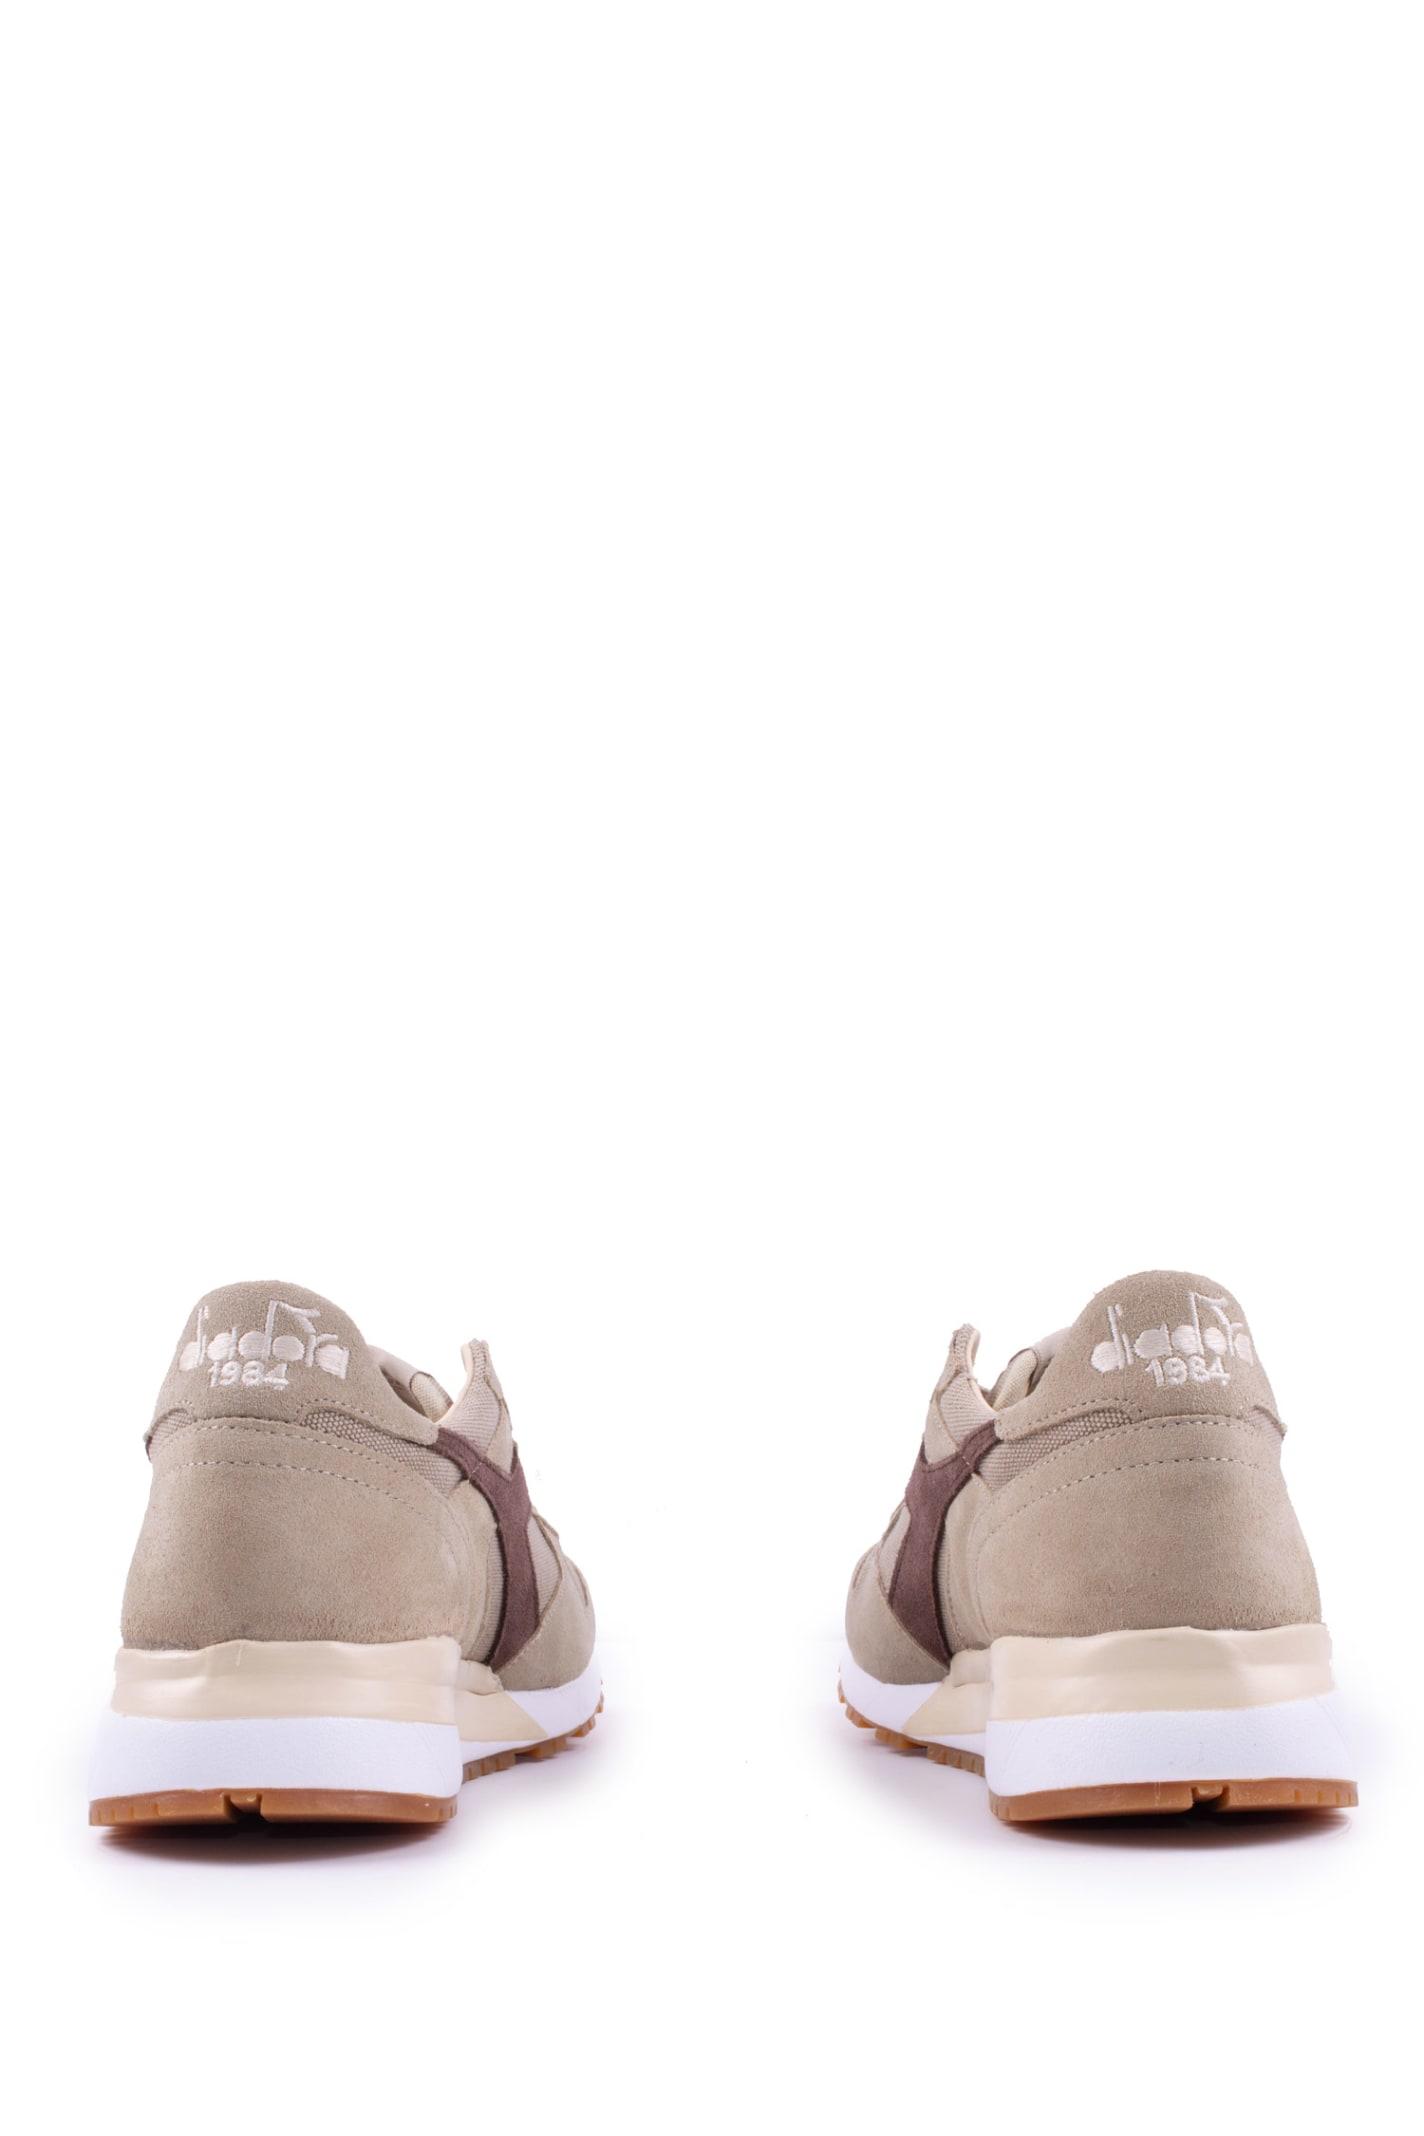 Diadora Trident 90 Canvas Sneakers in Beige (Natural) for Men | Lyst